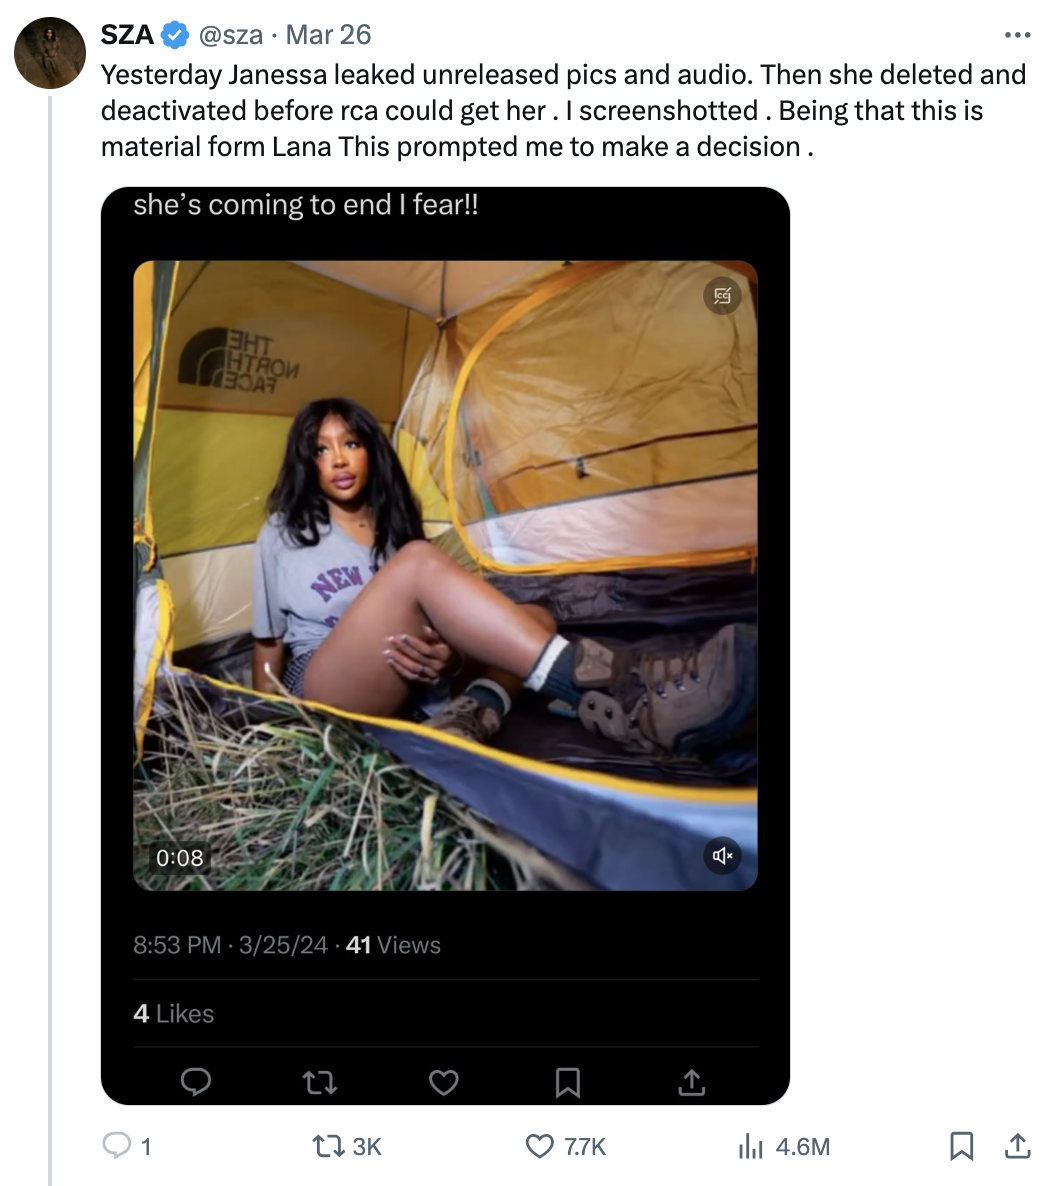 SZA sitting inside a tent looking at the camera, with a bemused expression and text overlay from a tweet